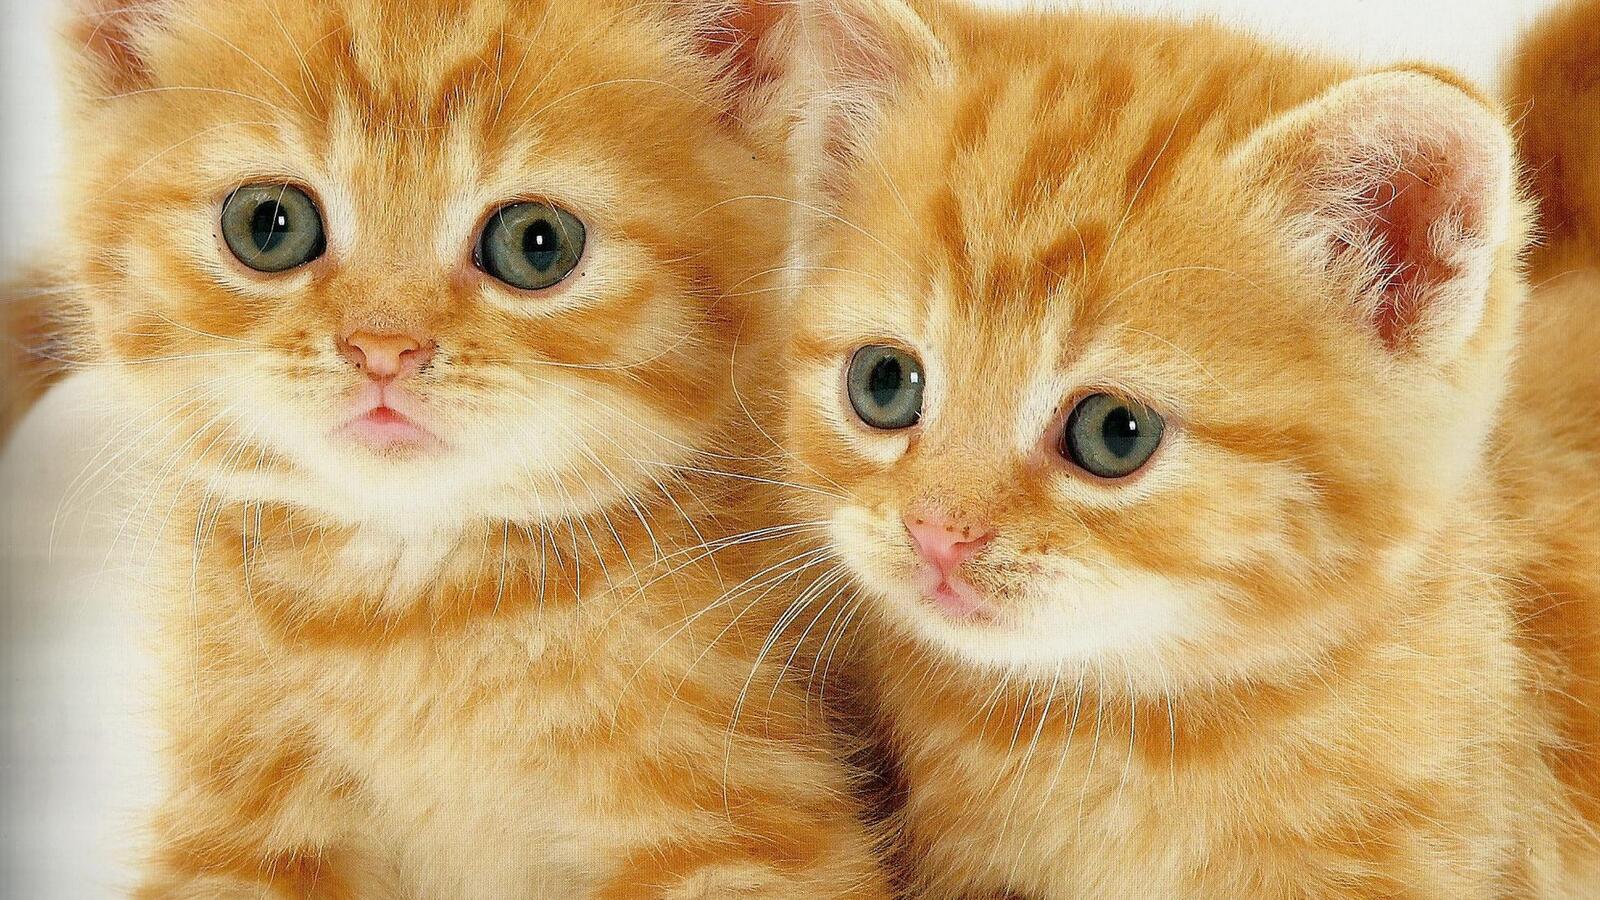 Wallpapers kittens redheads muzzles on the desktop